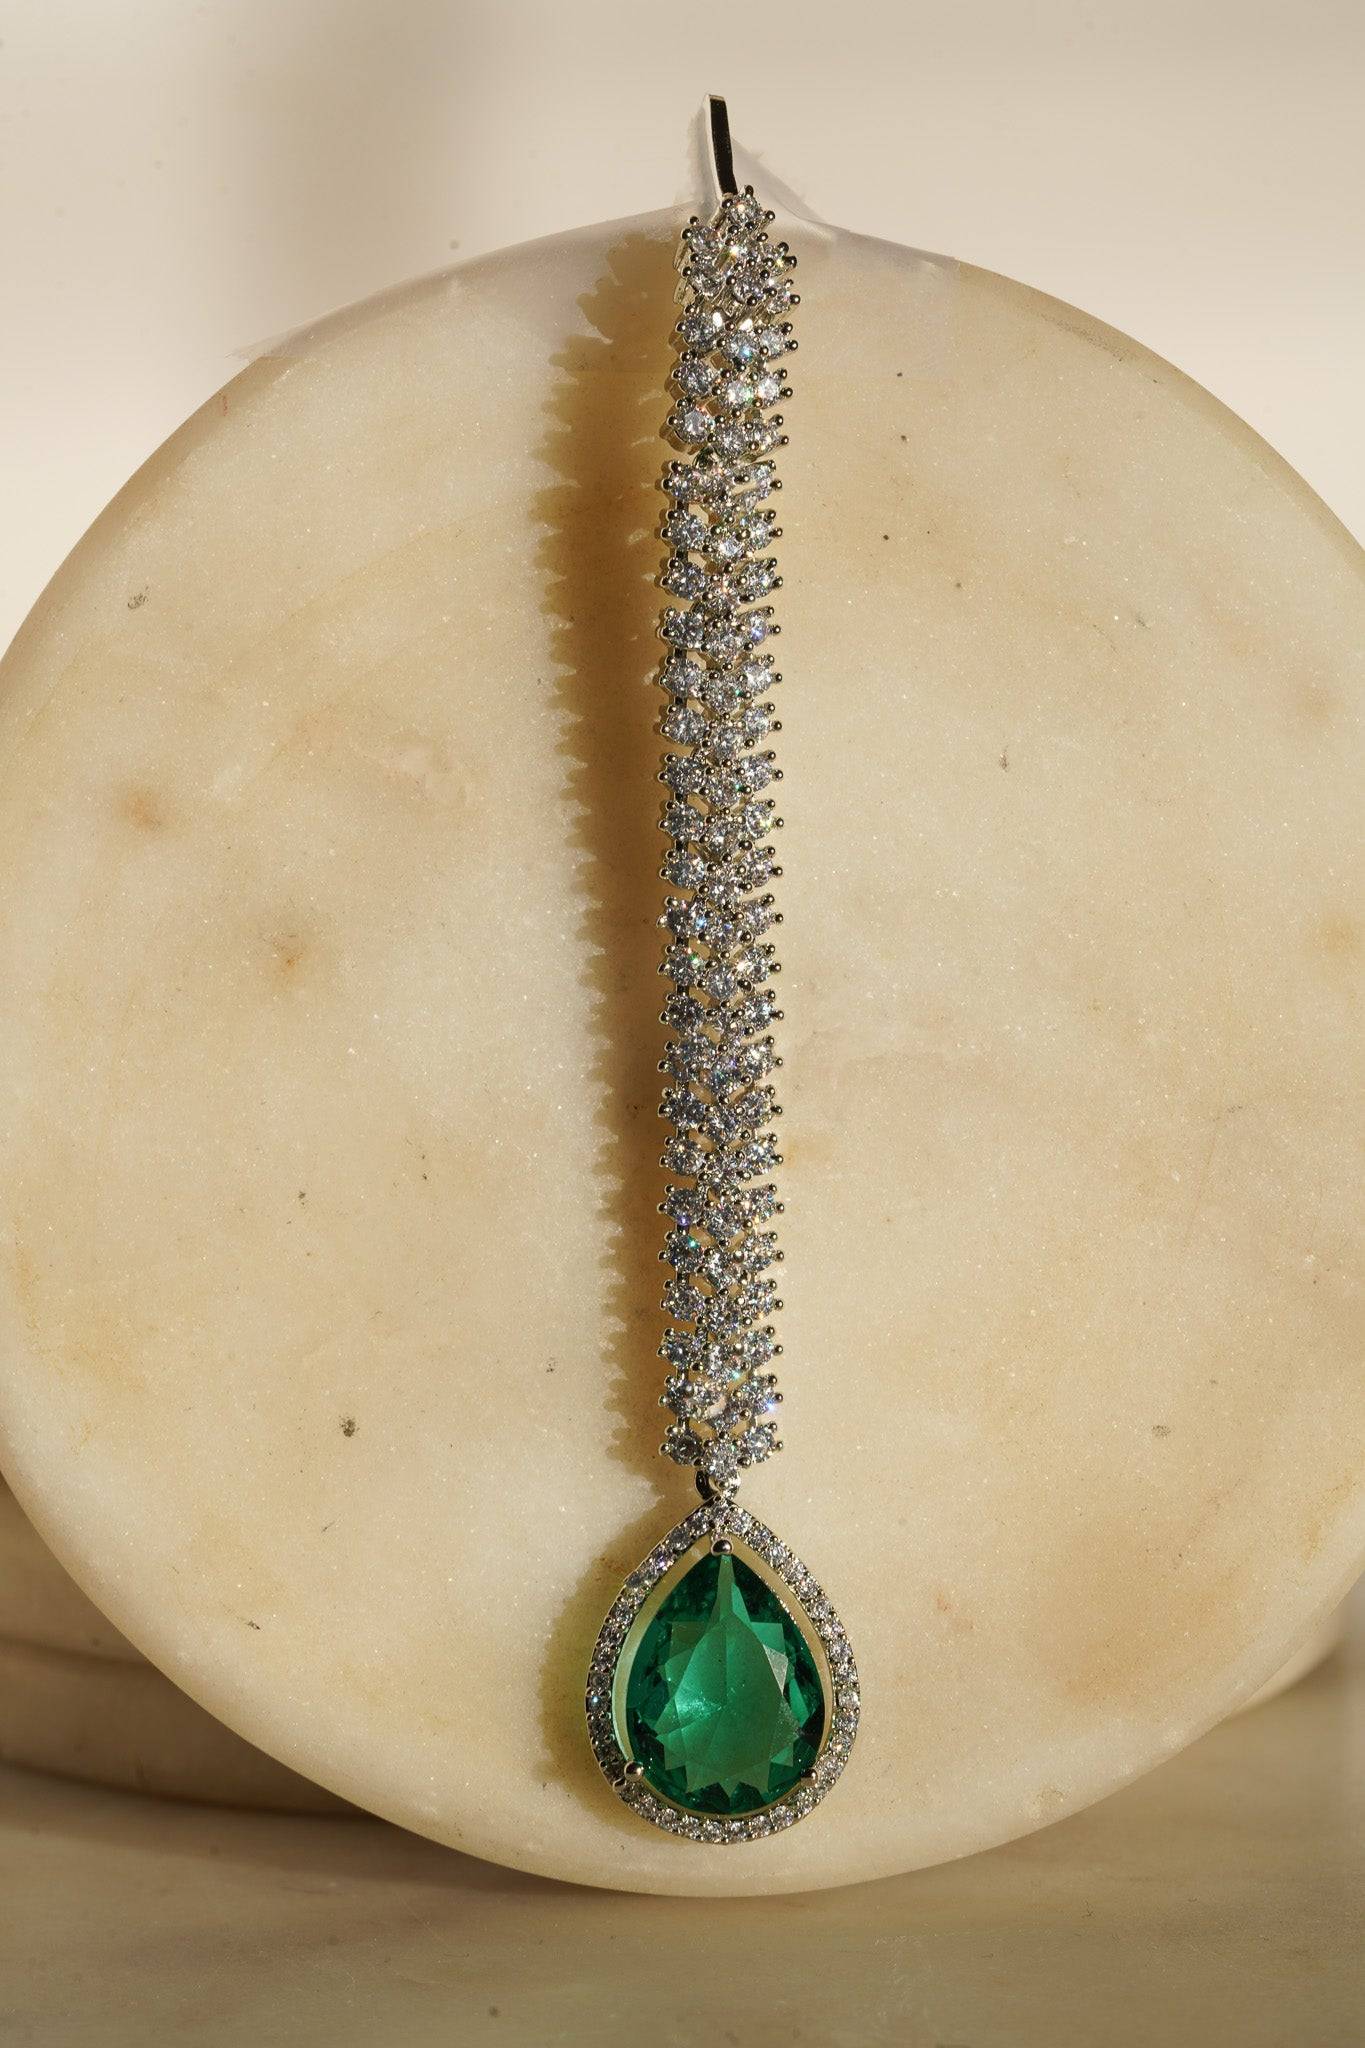 Safi Diamanté Accent Maang Tikka - Rhodium-plated with glistening diamante AD stones, available in emerald green or sapphire blue.